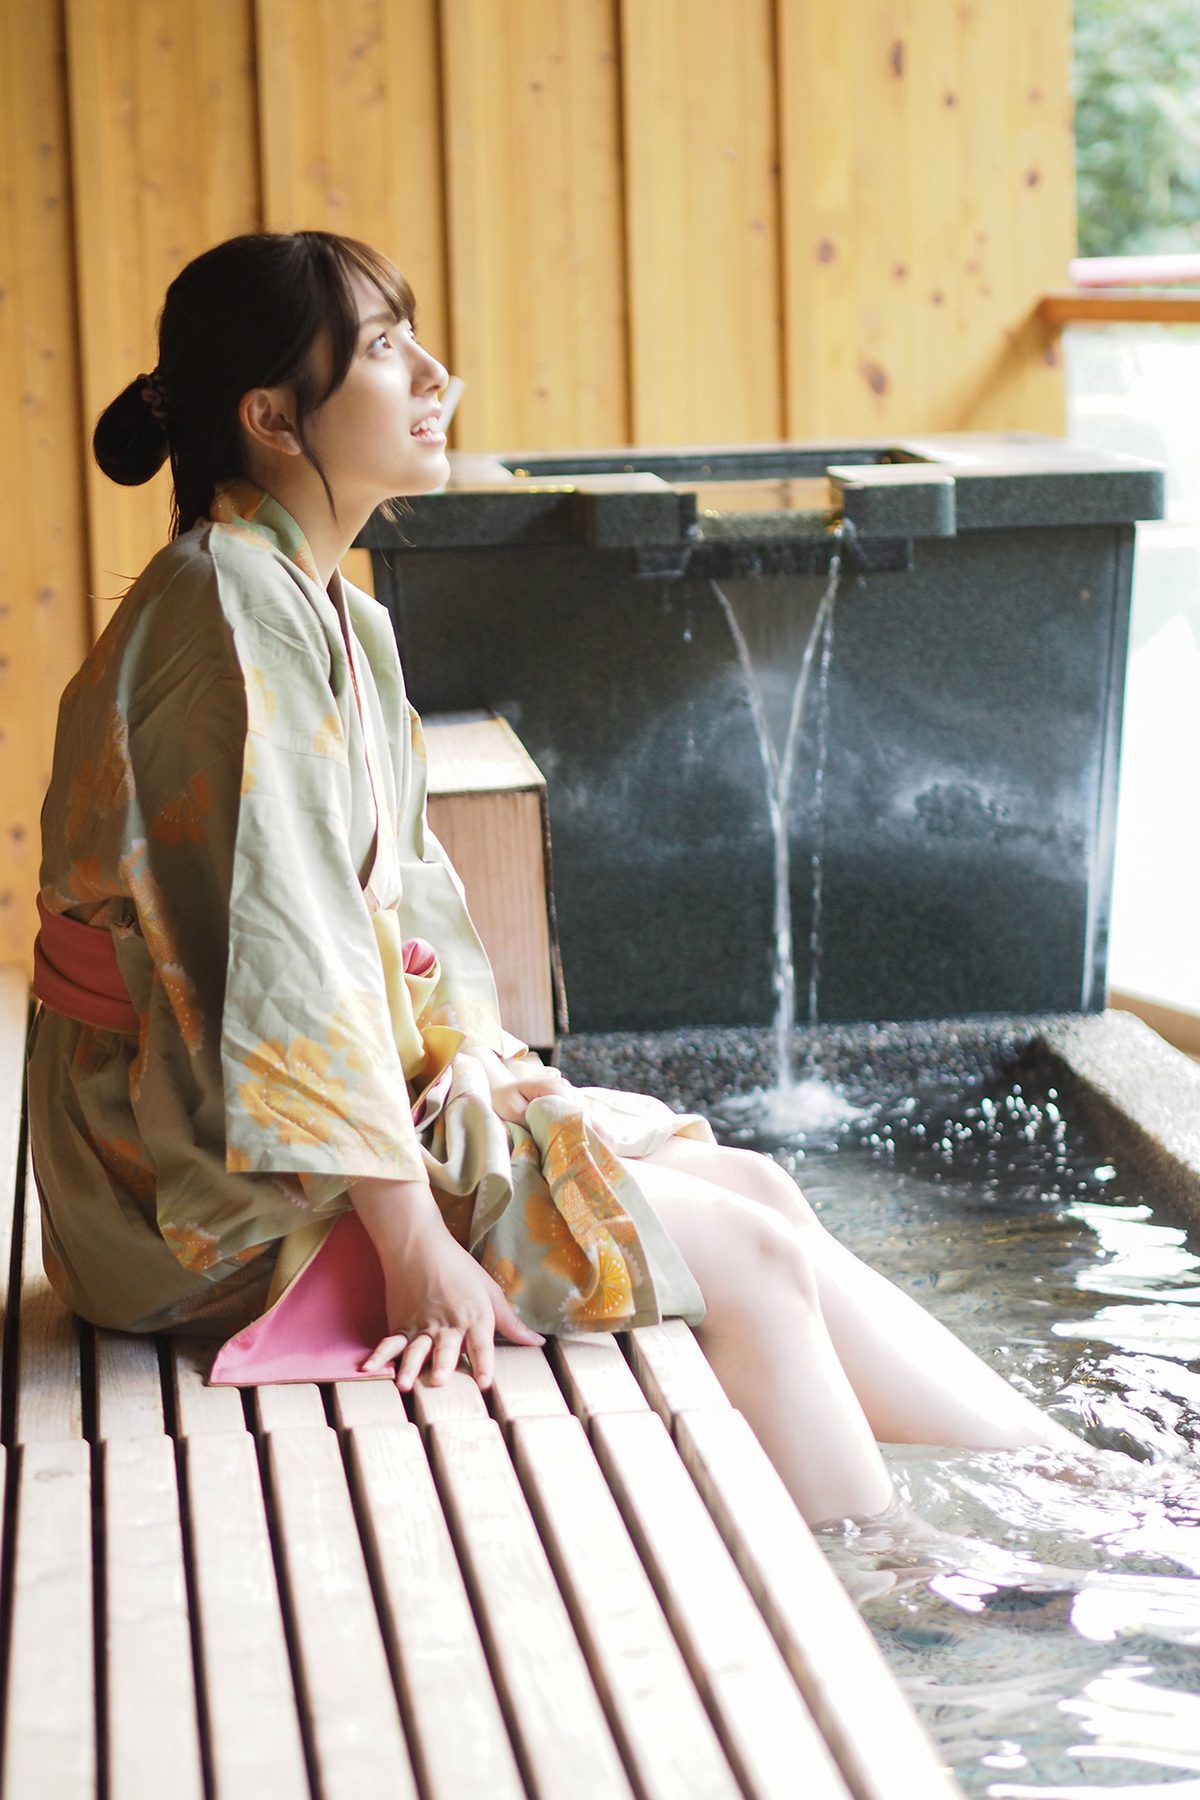 Owada Nana 大和田南那 Womens Travel Real Special Edition Continuation Private Part 1 0054 4011784793.jpg